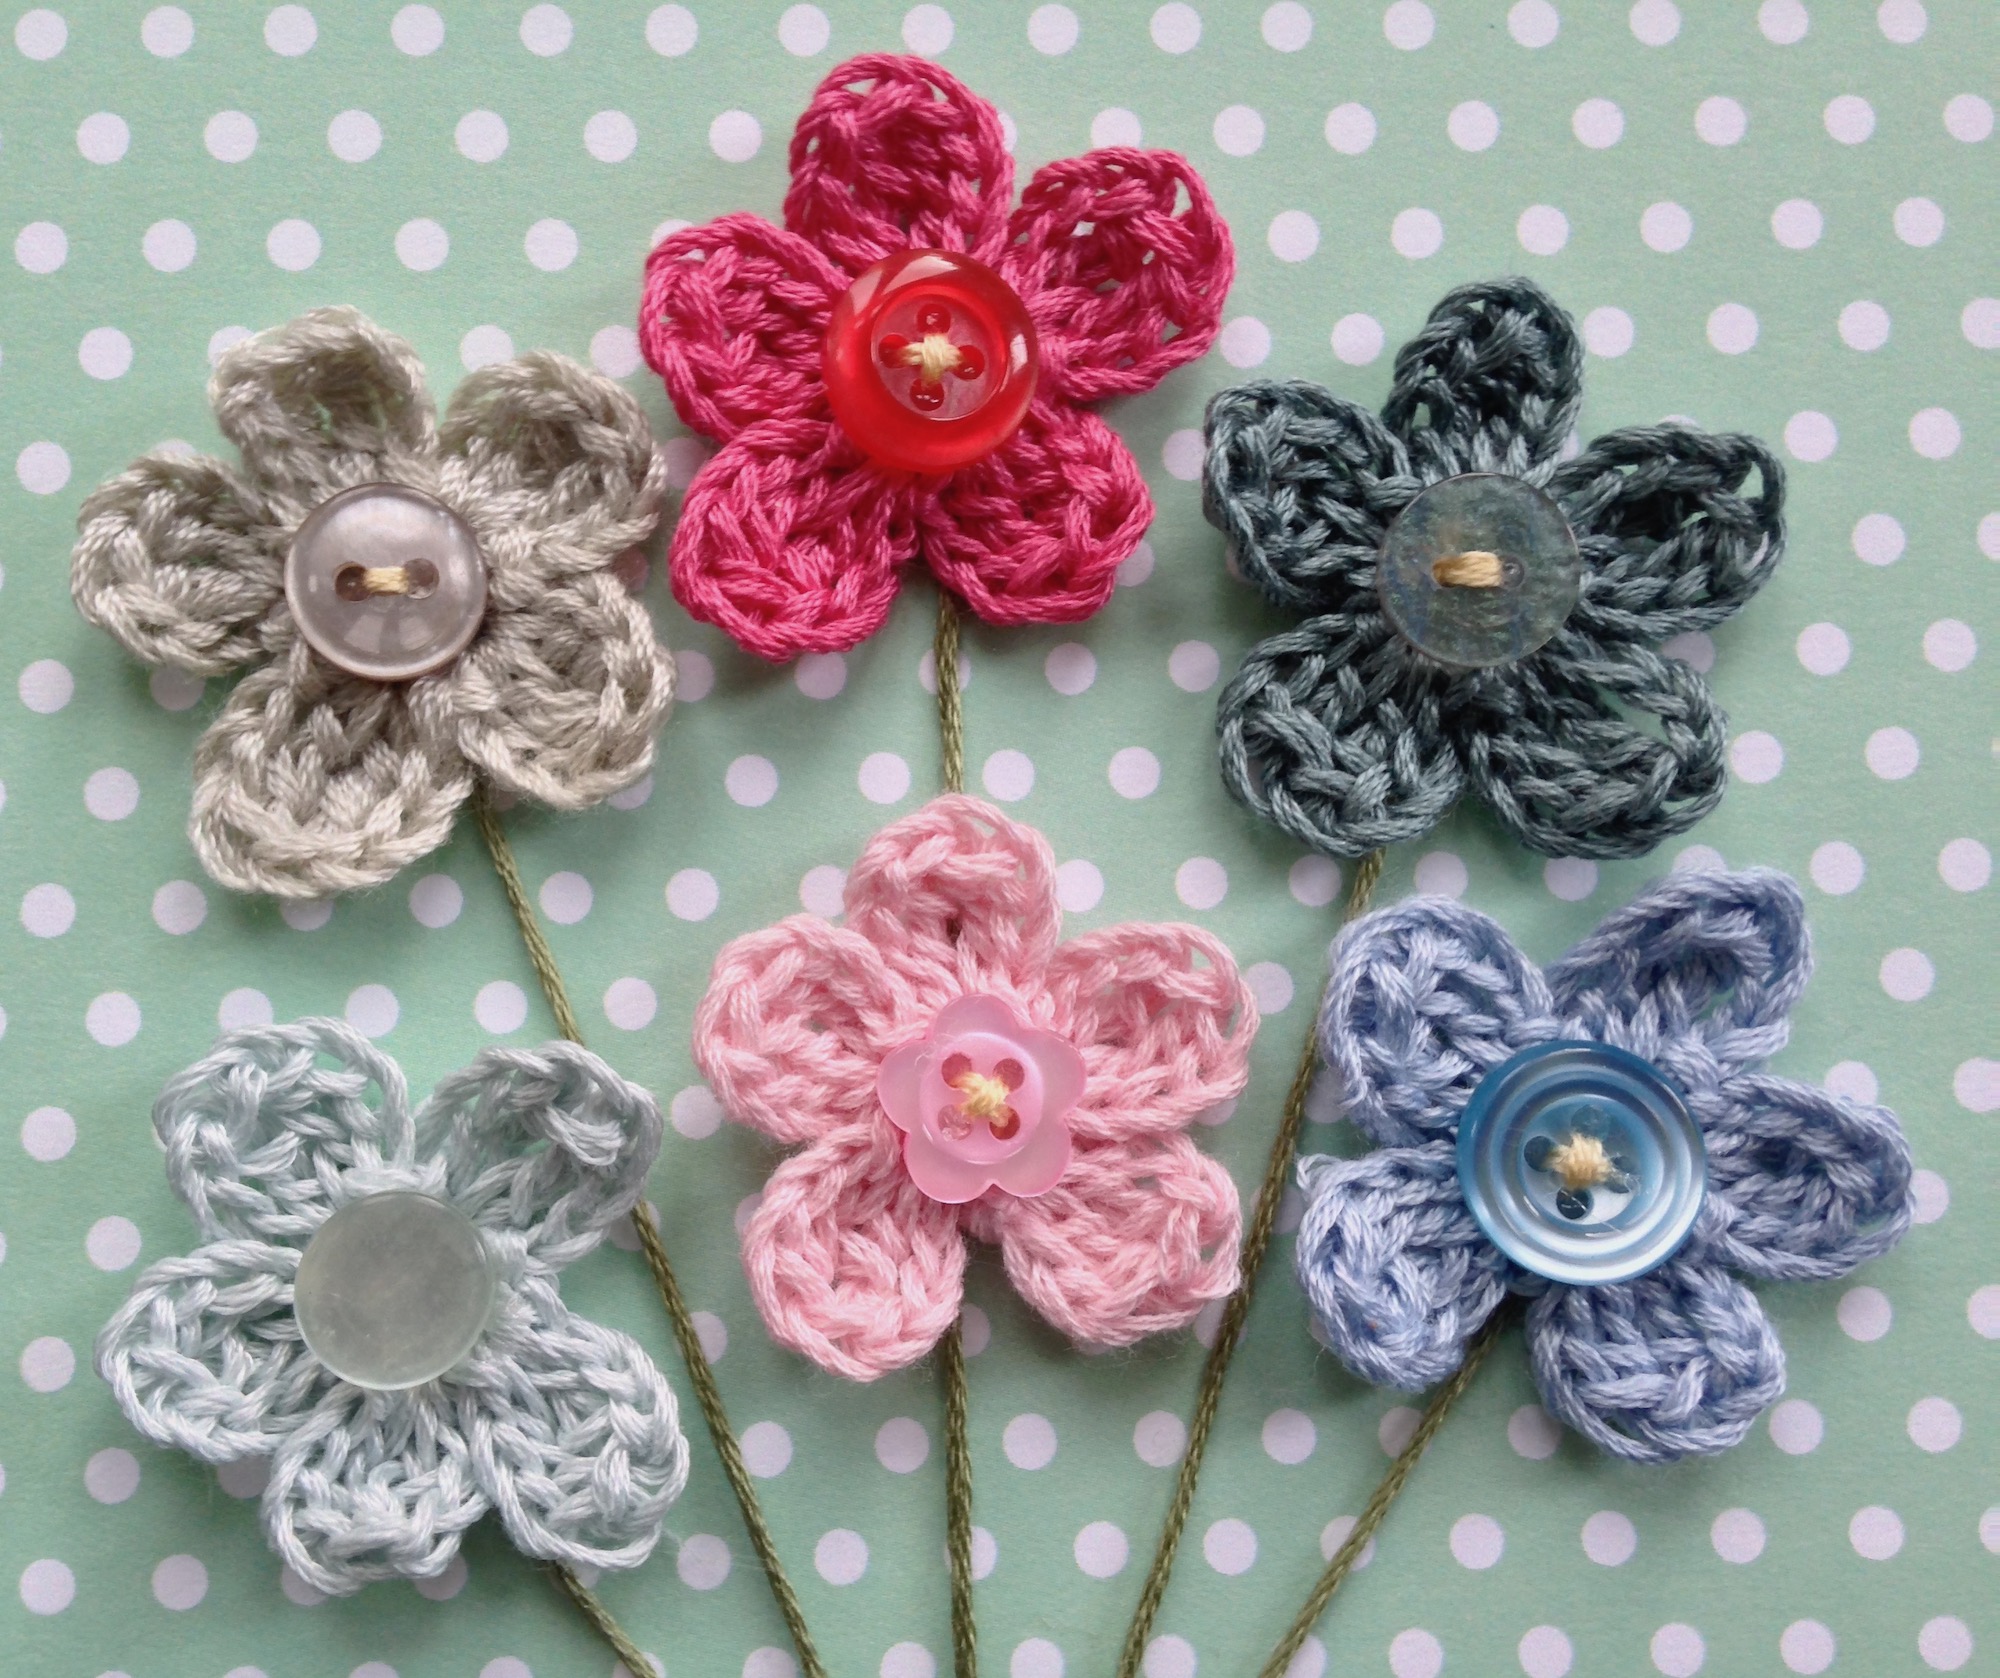 Posy of crocheted flowers greetings card.